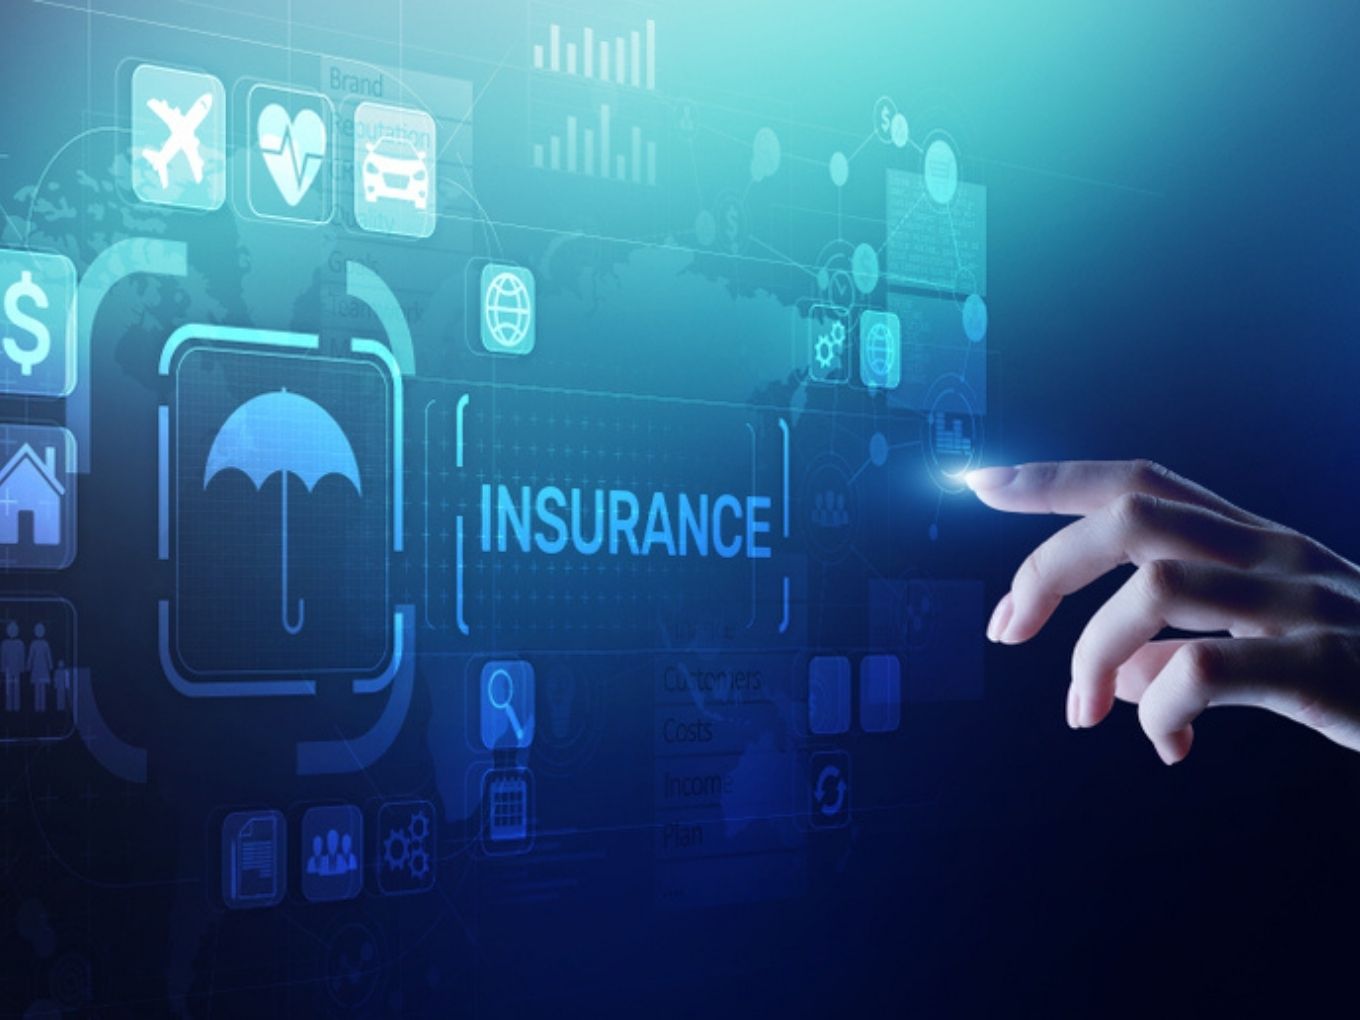 Digit Insurance Becomes First Unicorn Of 2021 With $18 Mn Fundraise